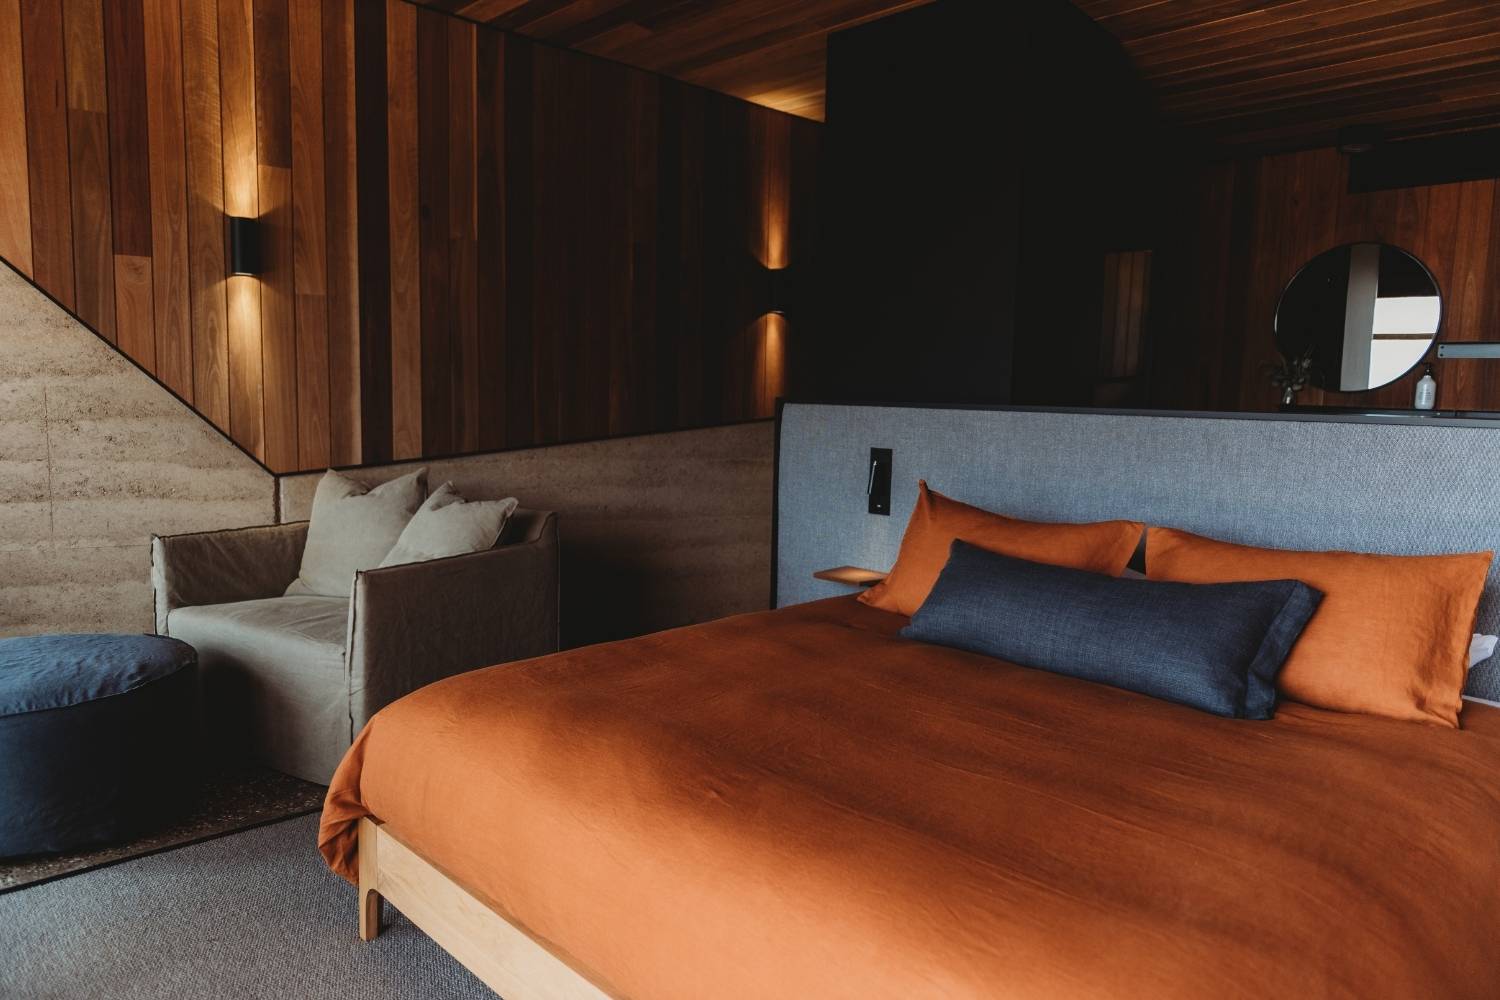 An image of a bed dressed in rich orange linen, illuminated by warm and dim lighting. The vibrant orange hue of the bedding adds a pop of color and warmth to the space, creating a cozy and inviting atmosphere. 